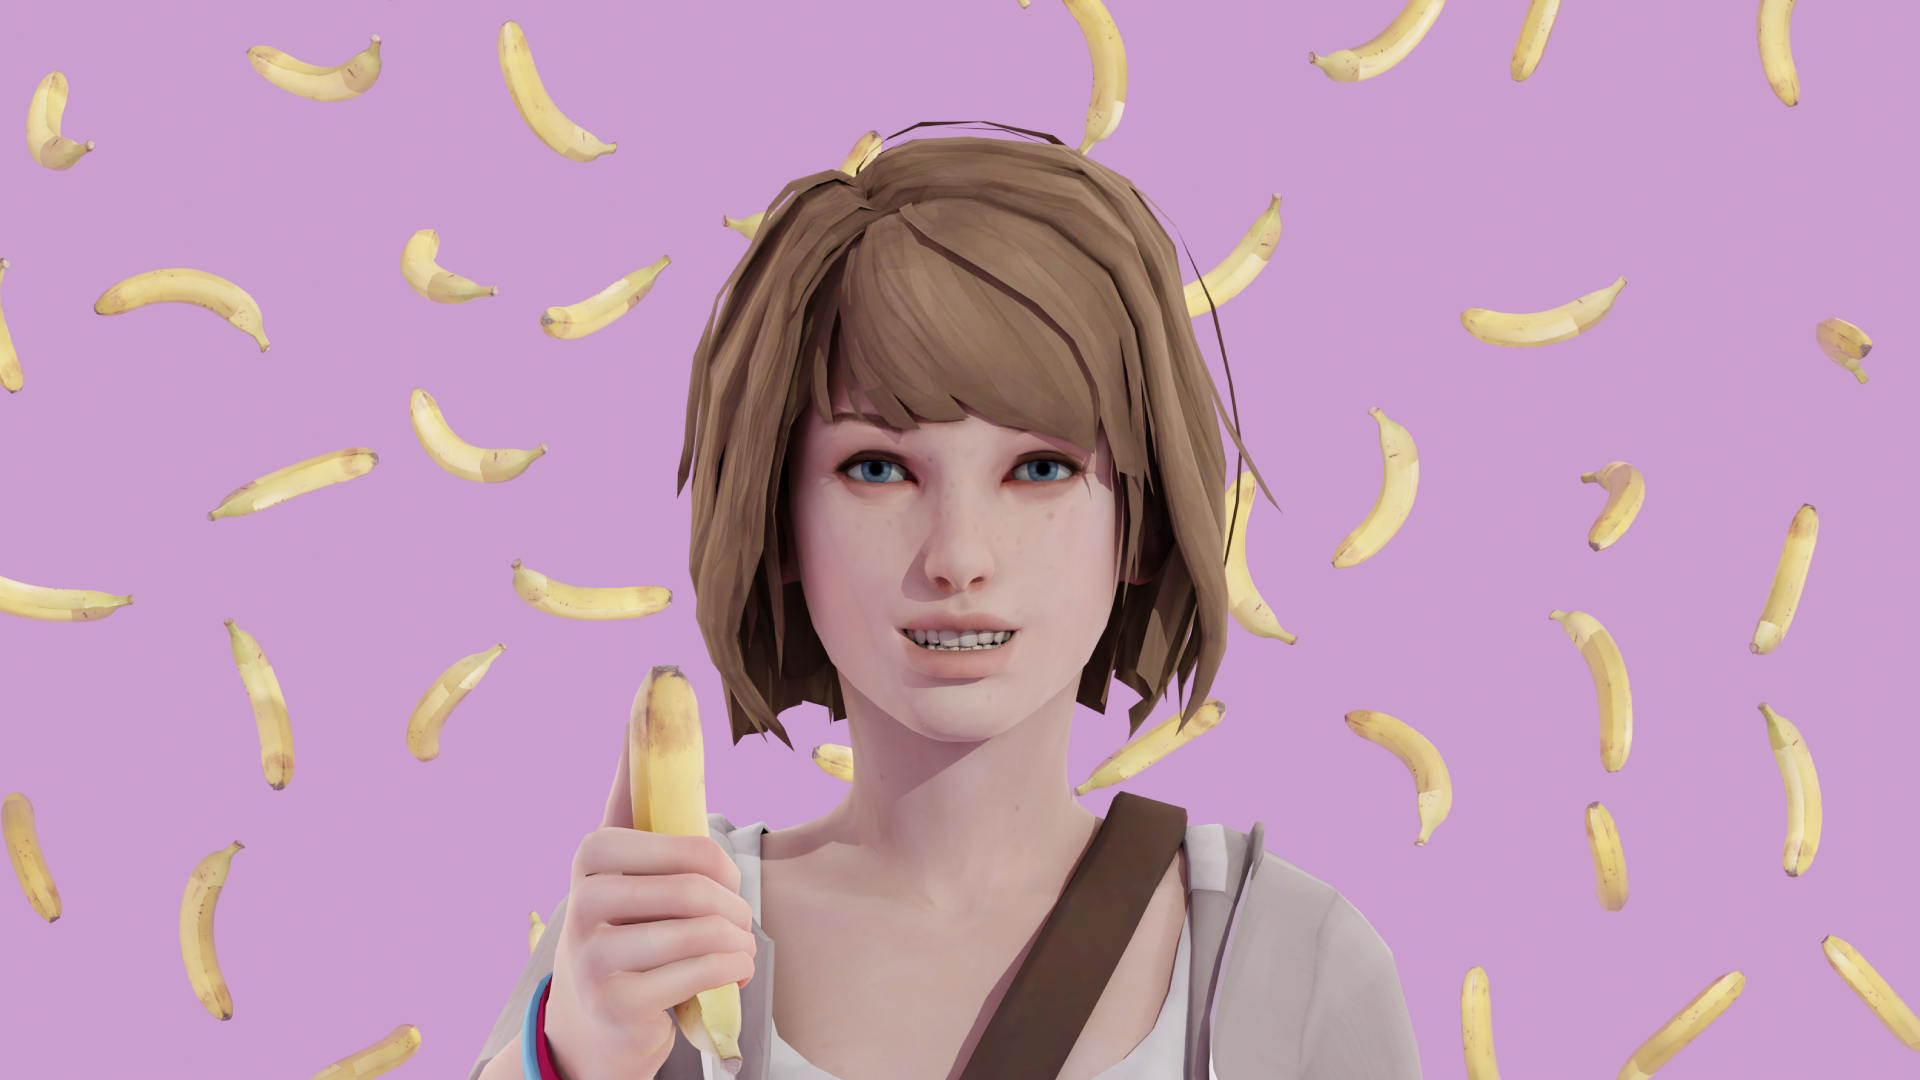 Max Caulfield Bananas Video Game Characters Video Games PC Gaming Blue Eyes Bob Hairstyle Brunette C 1920x1080